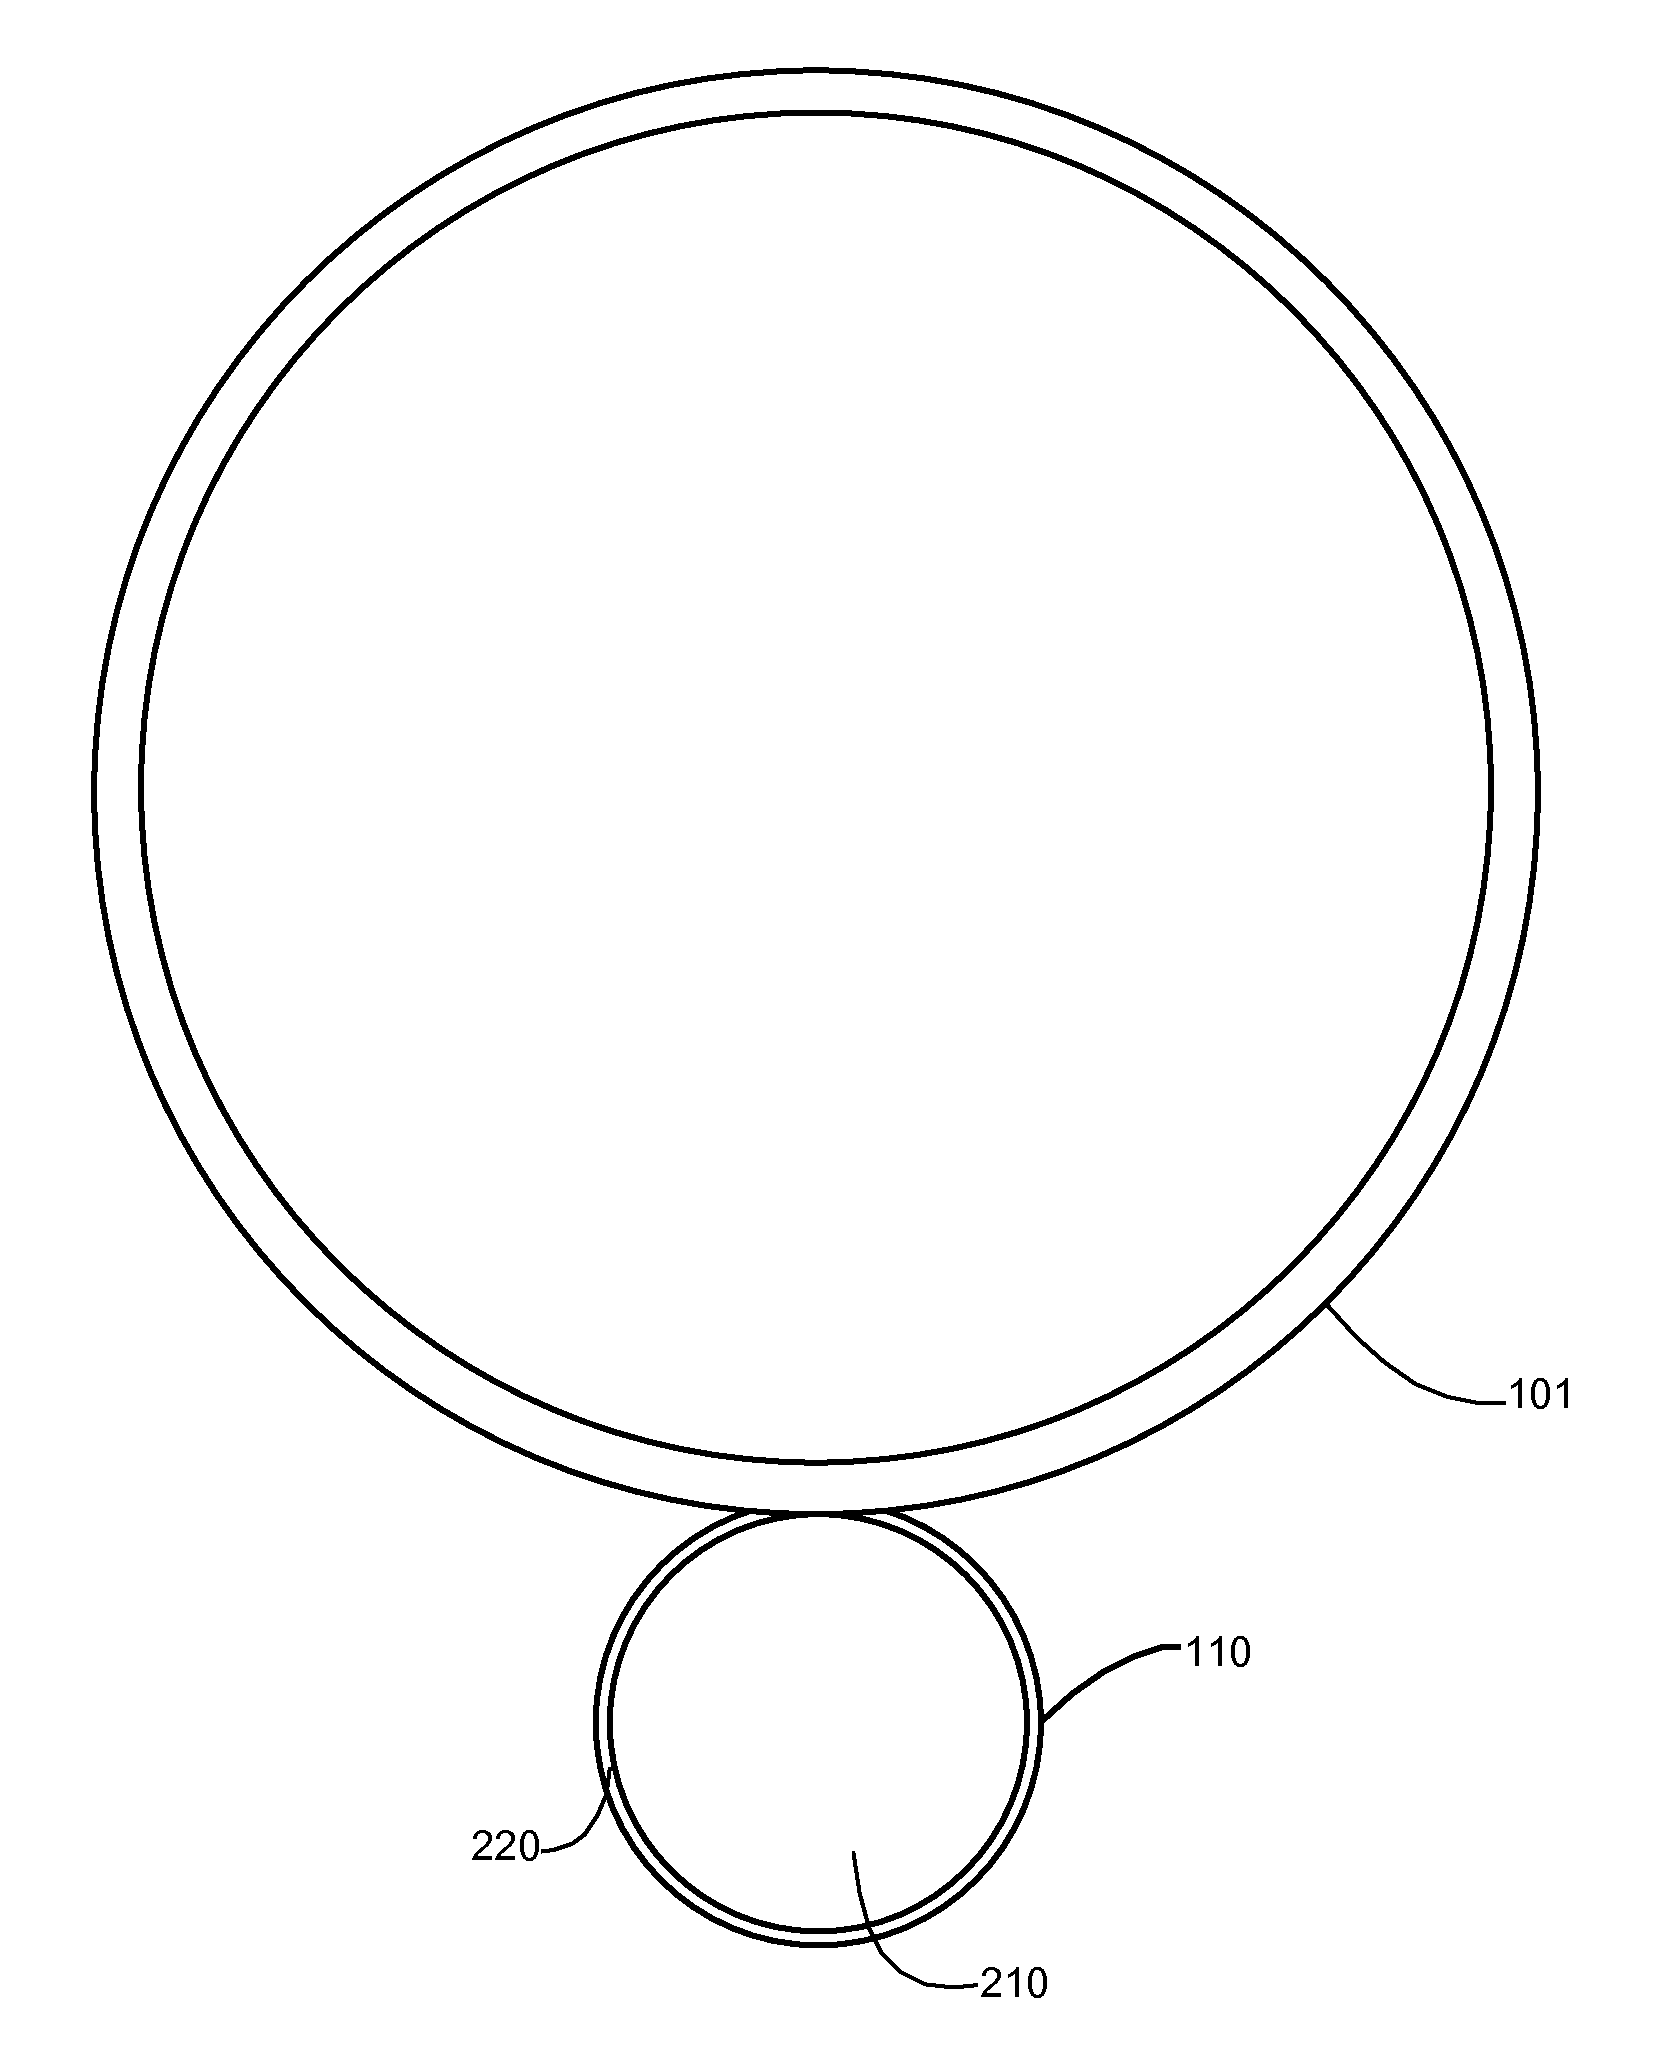 Charge Roller for an Image Forming Apparatus Using Hard Filler Particles